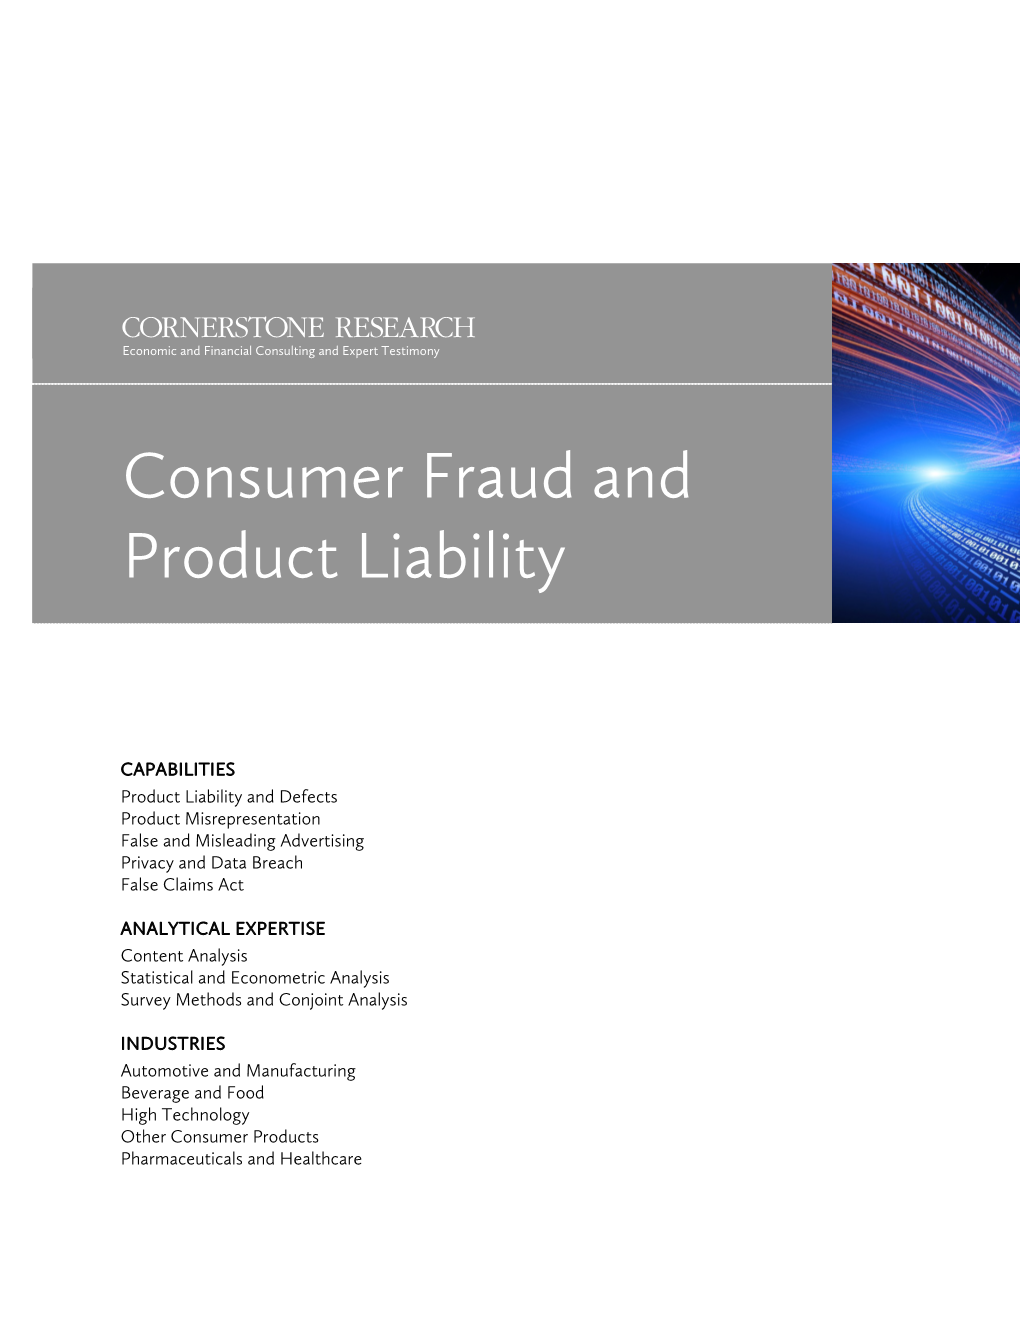 Consumer Fraud and Product Liability Capabilities